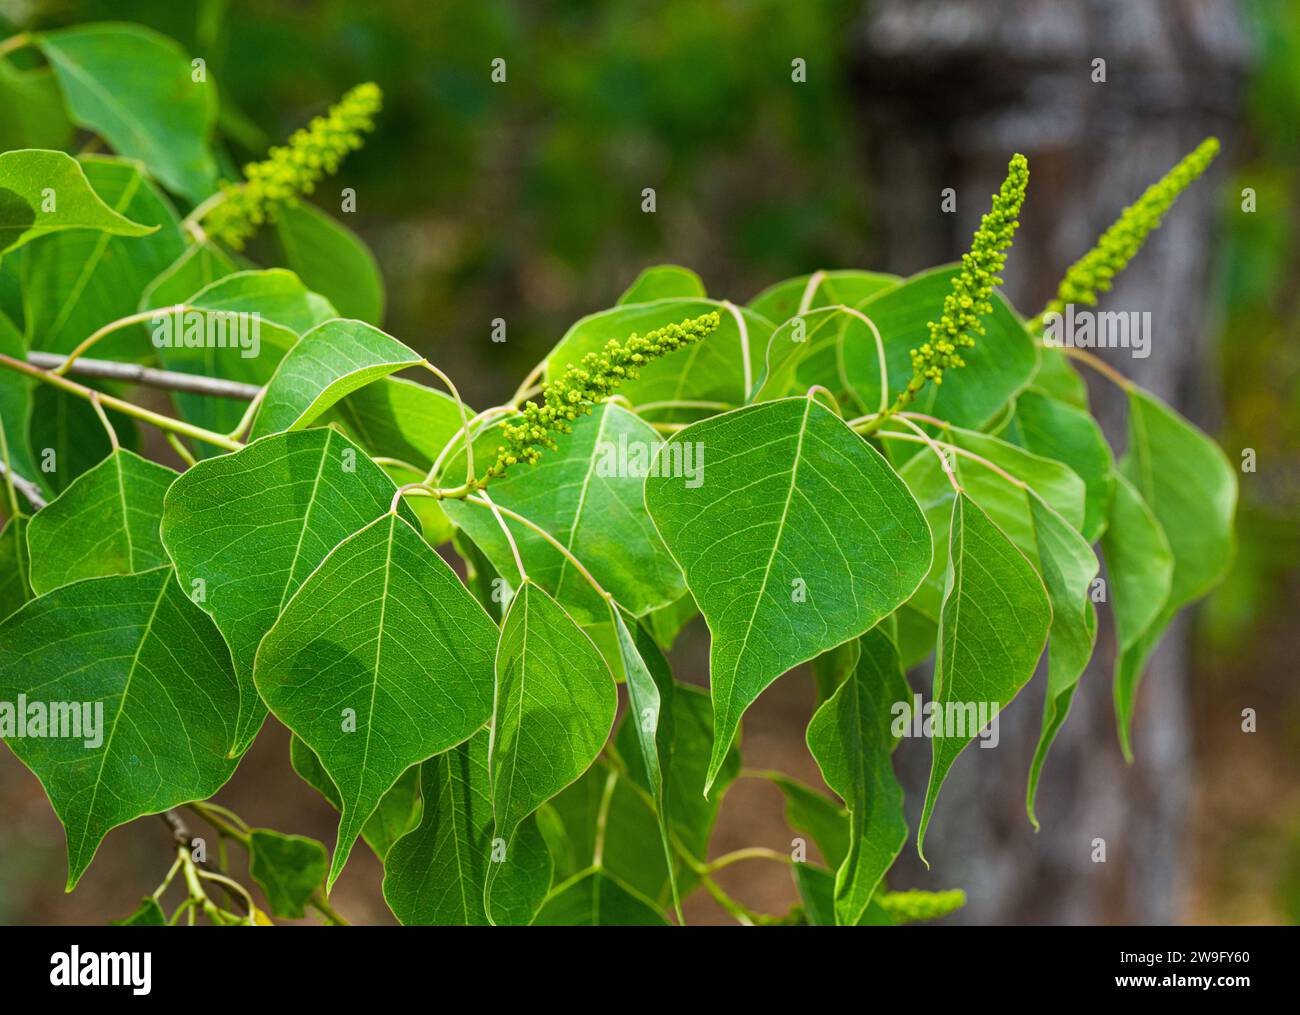 Chinese tallow tree - Triadica sebifera - blooms, blossom, flowers in summer showing green heart shaped leaves that contain an oil use to treat boils Stock Photo